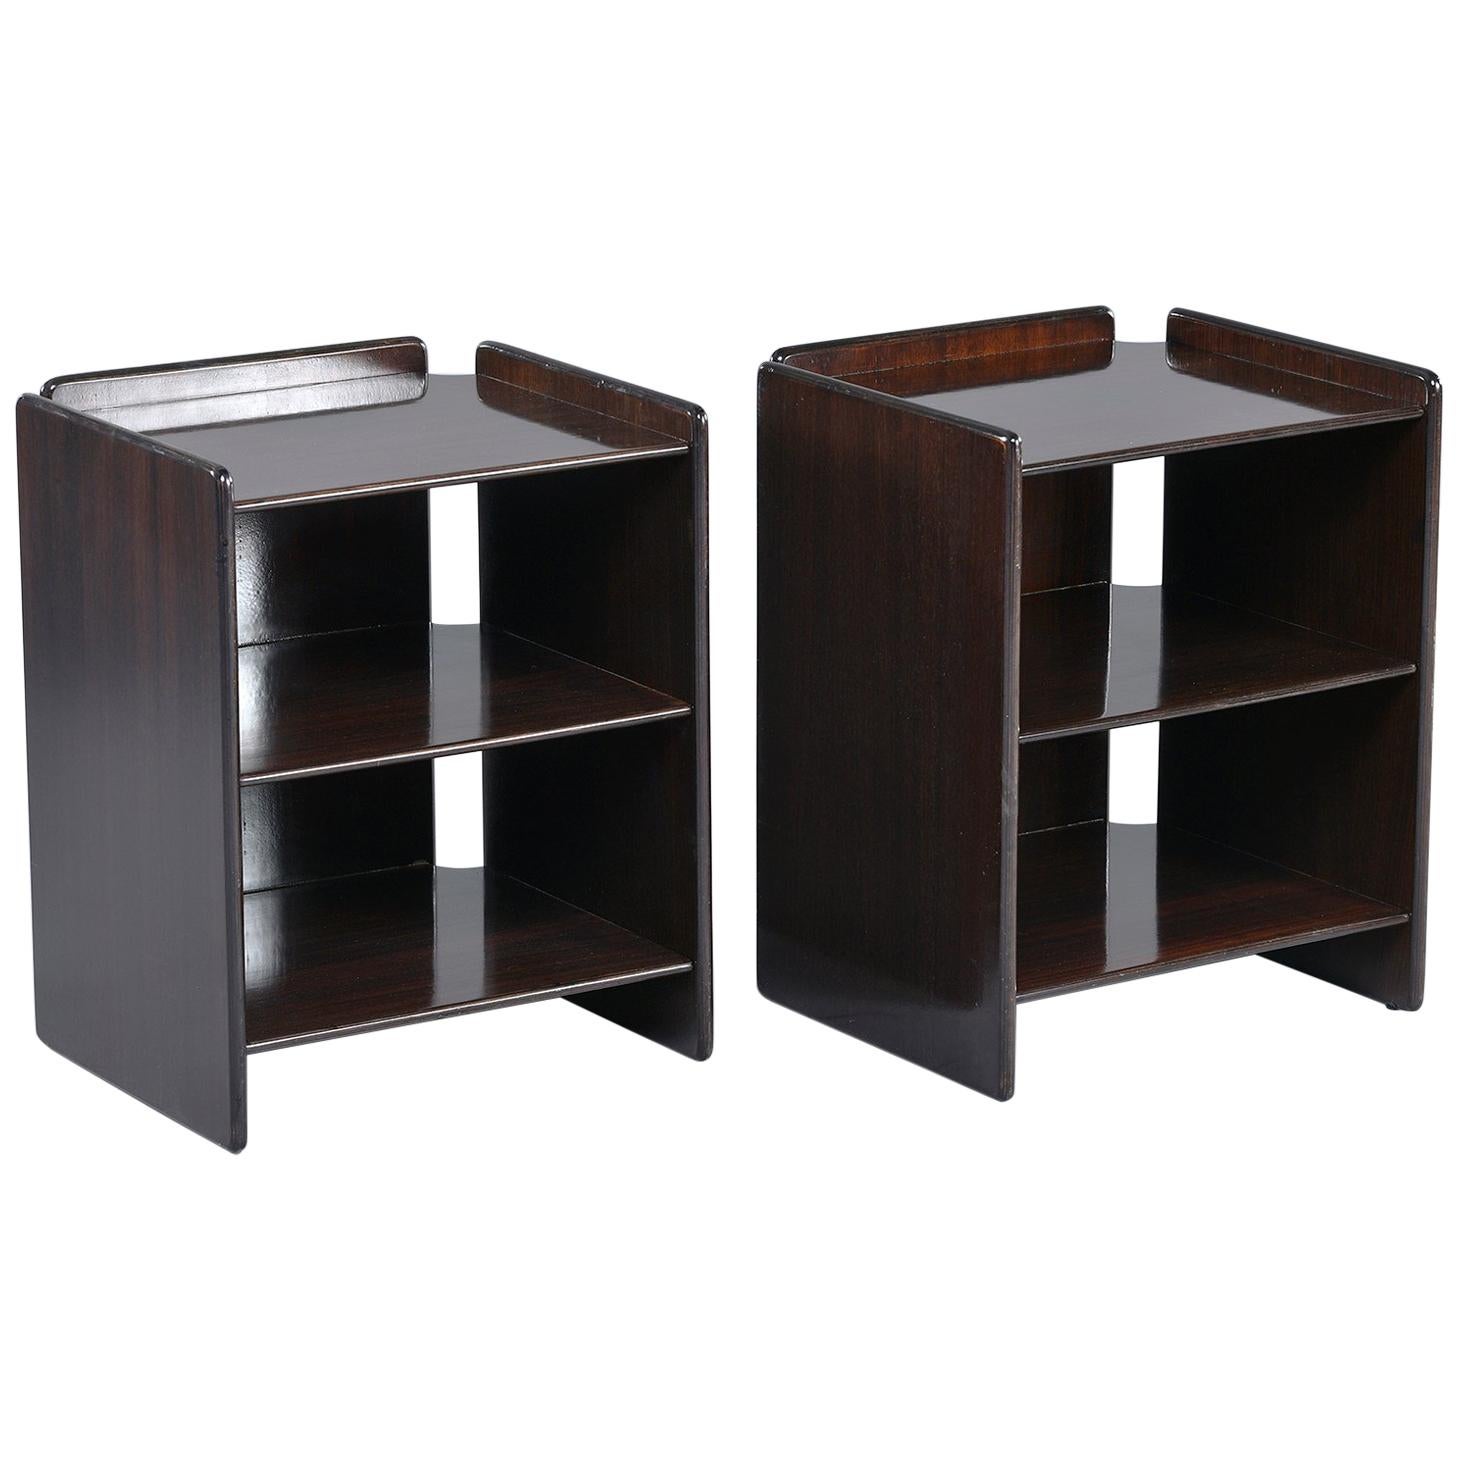 Pair of Dark Walnut Side Tables with Two Open Shelves